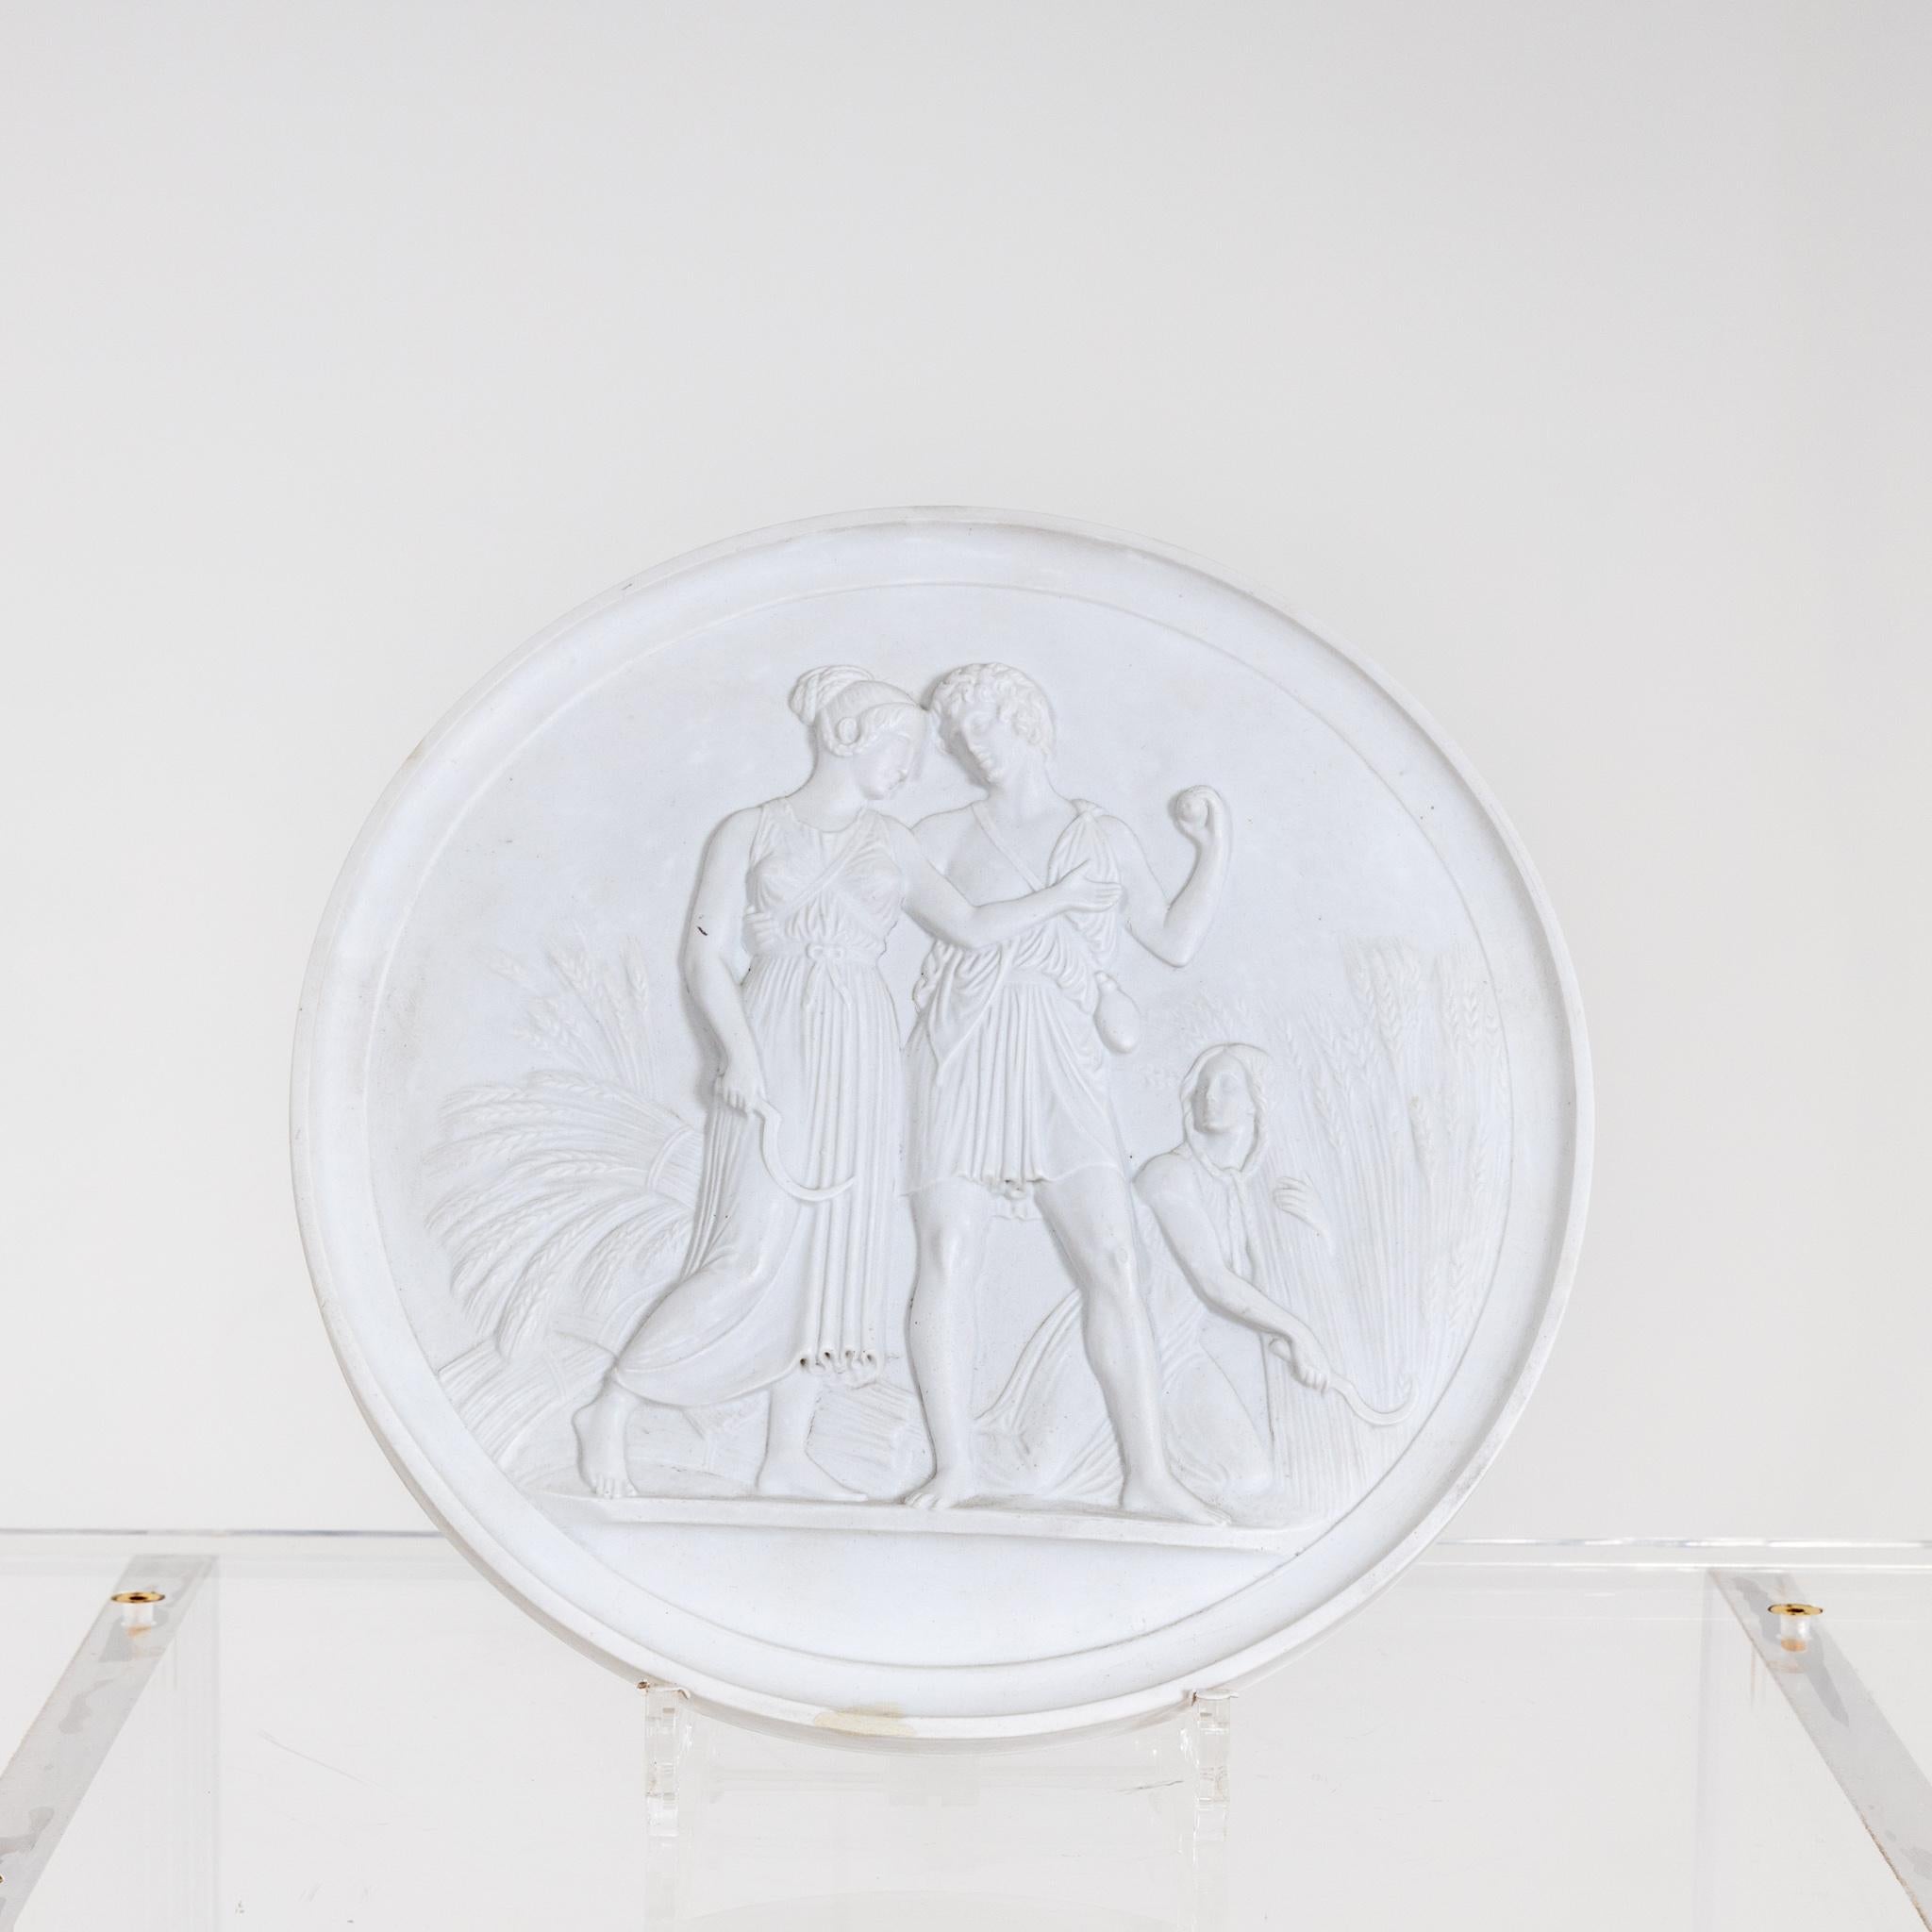 Round biscuit porcelain plaque depicting summer after the Four Seasons cycle by Bertel Thorvaldsen.